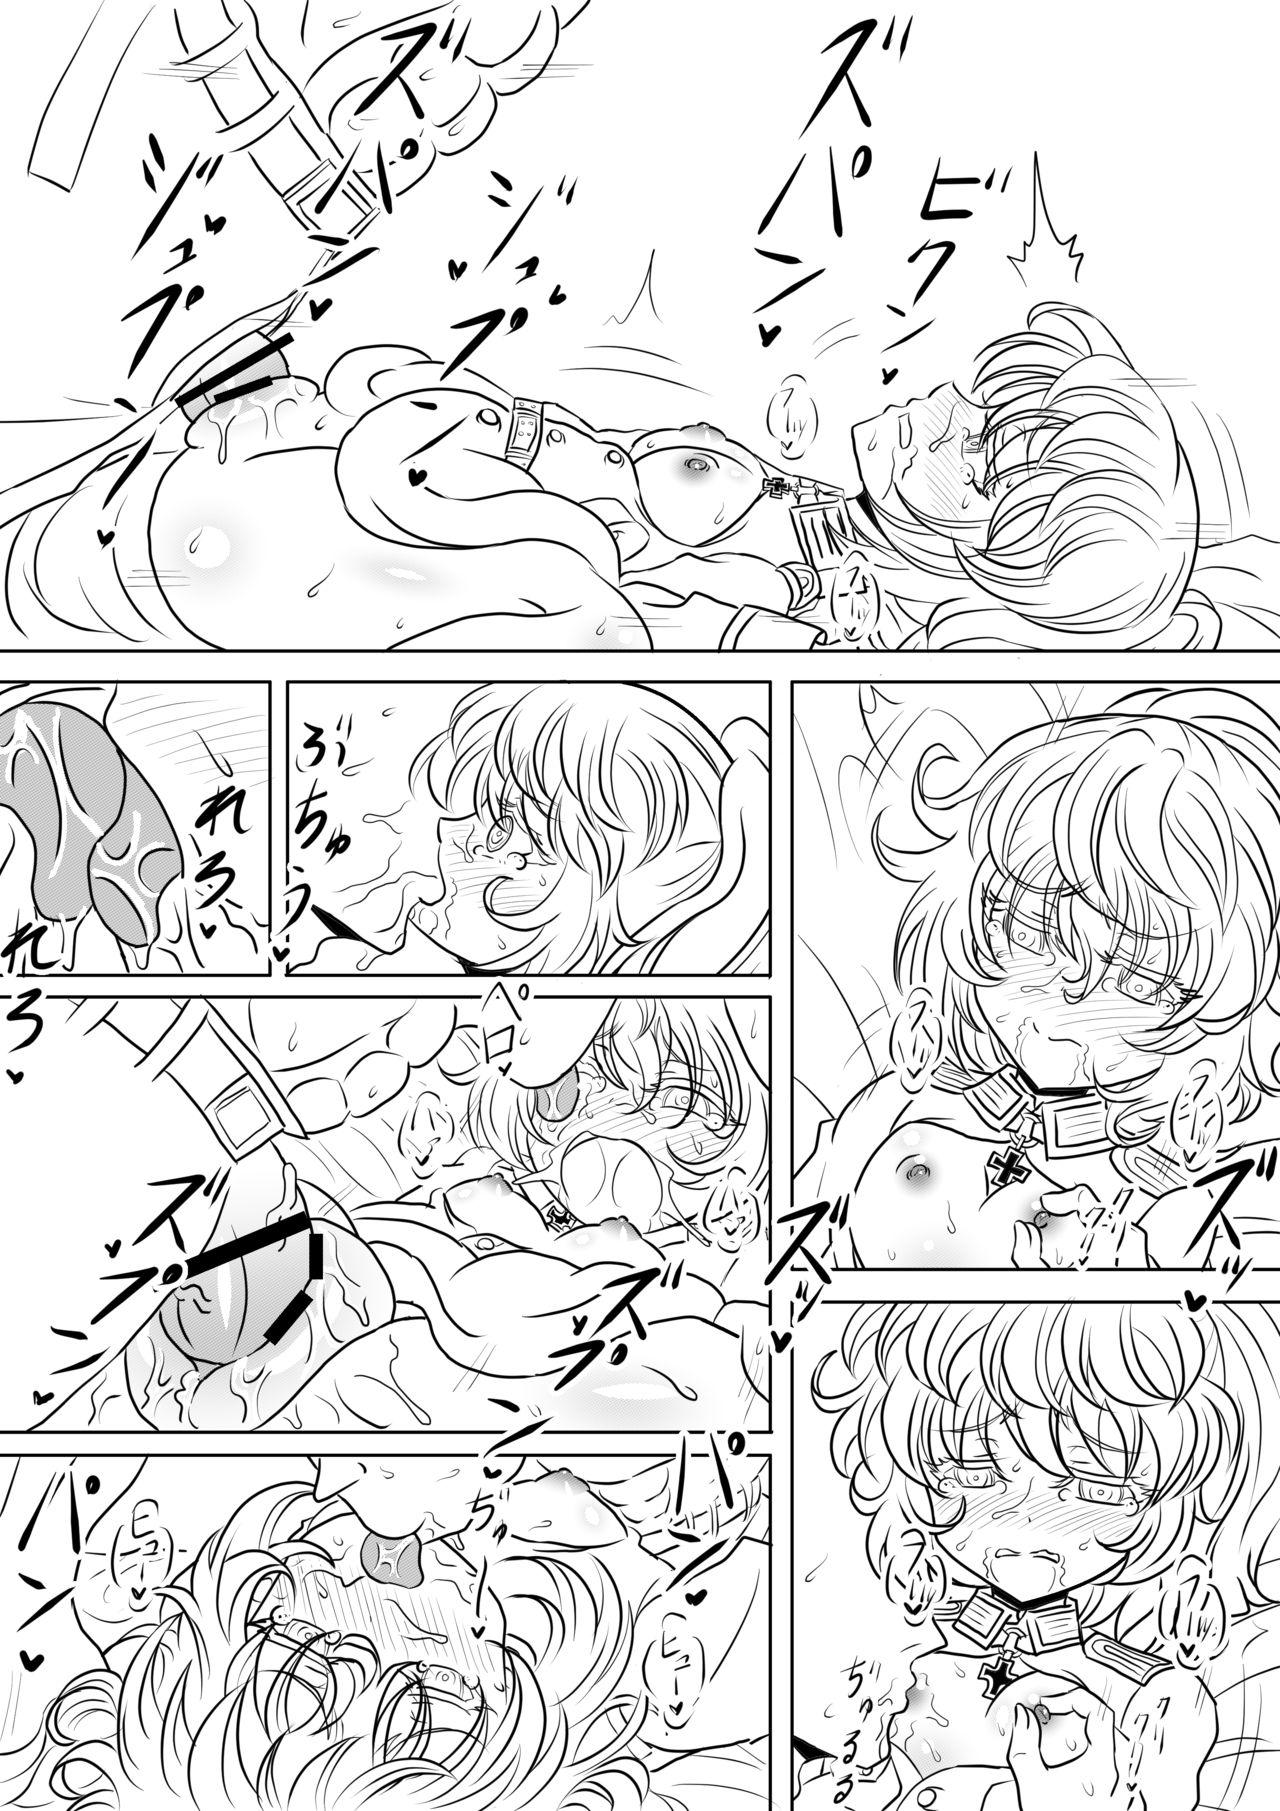 Asstomouth 漫画版幼女戦記エロ同人誌全7ページ - Youjo senki Family Roleplay - Page 9